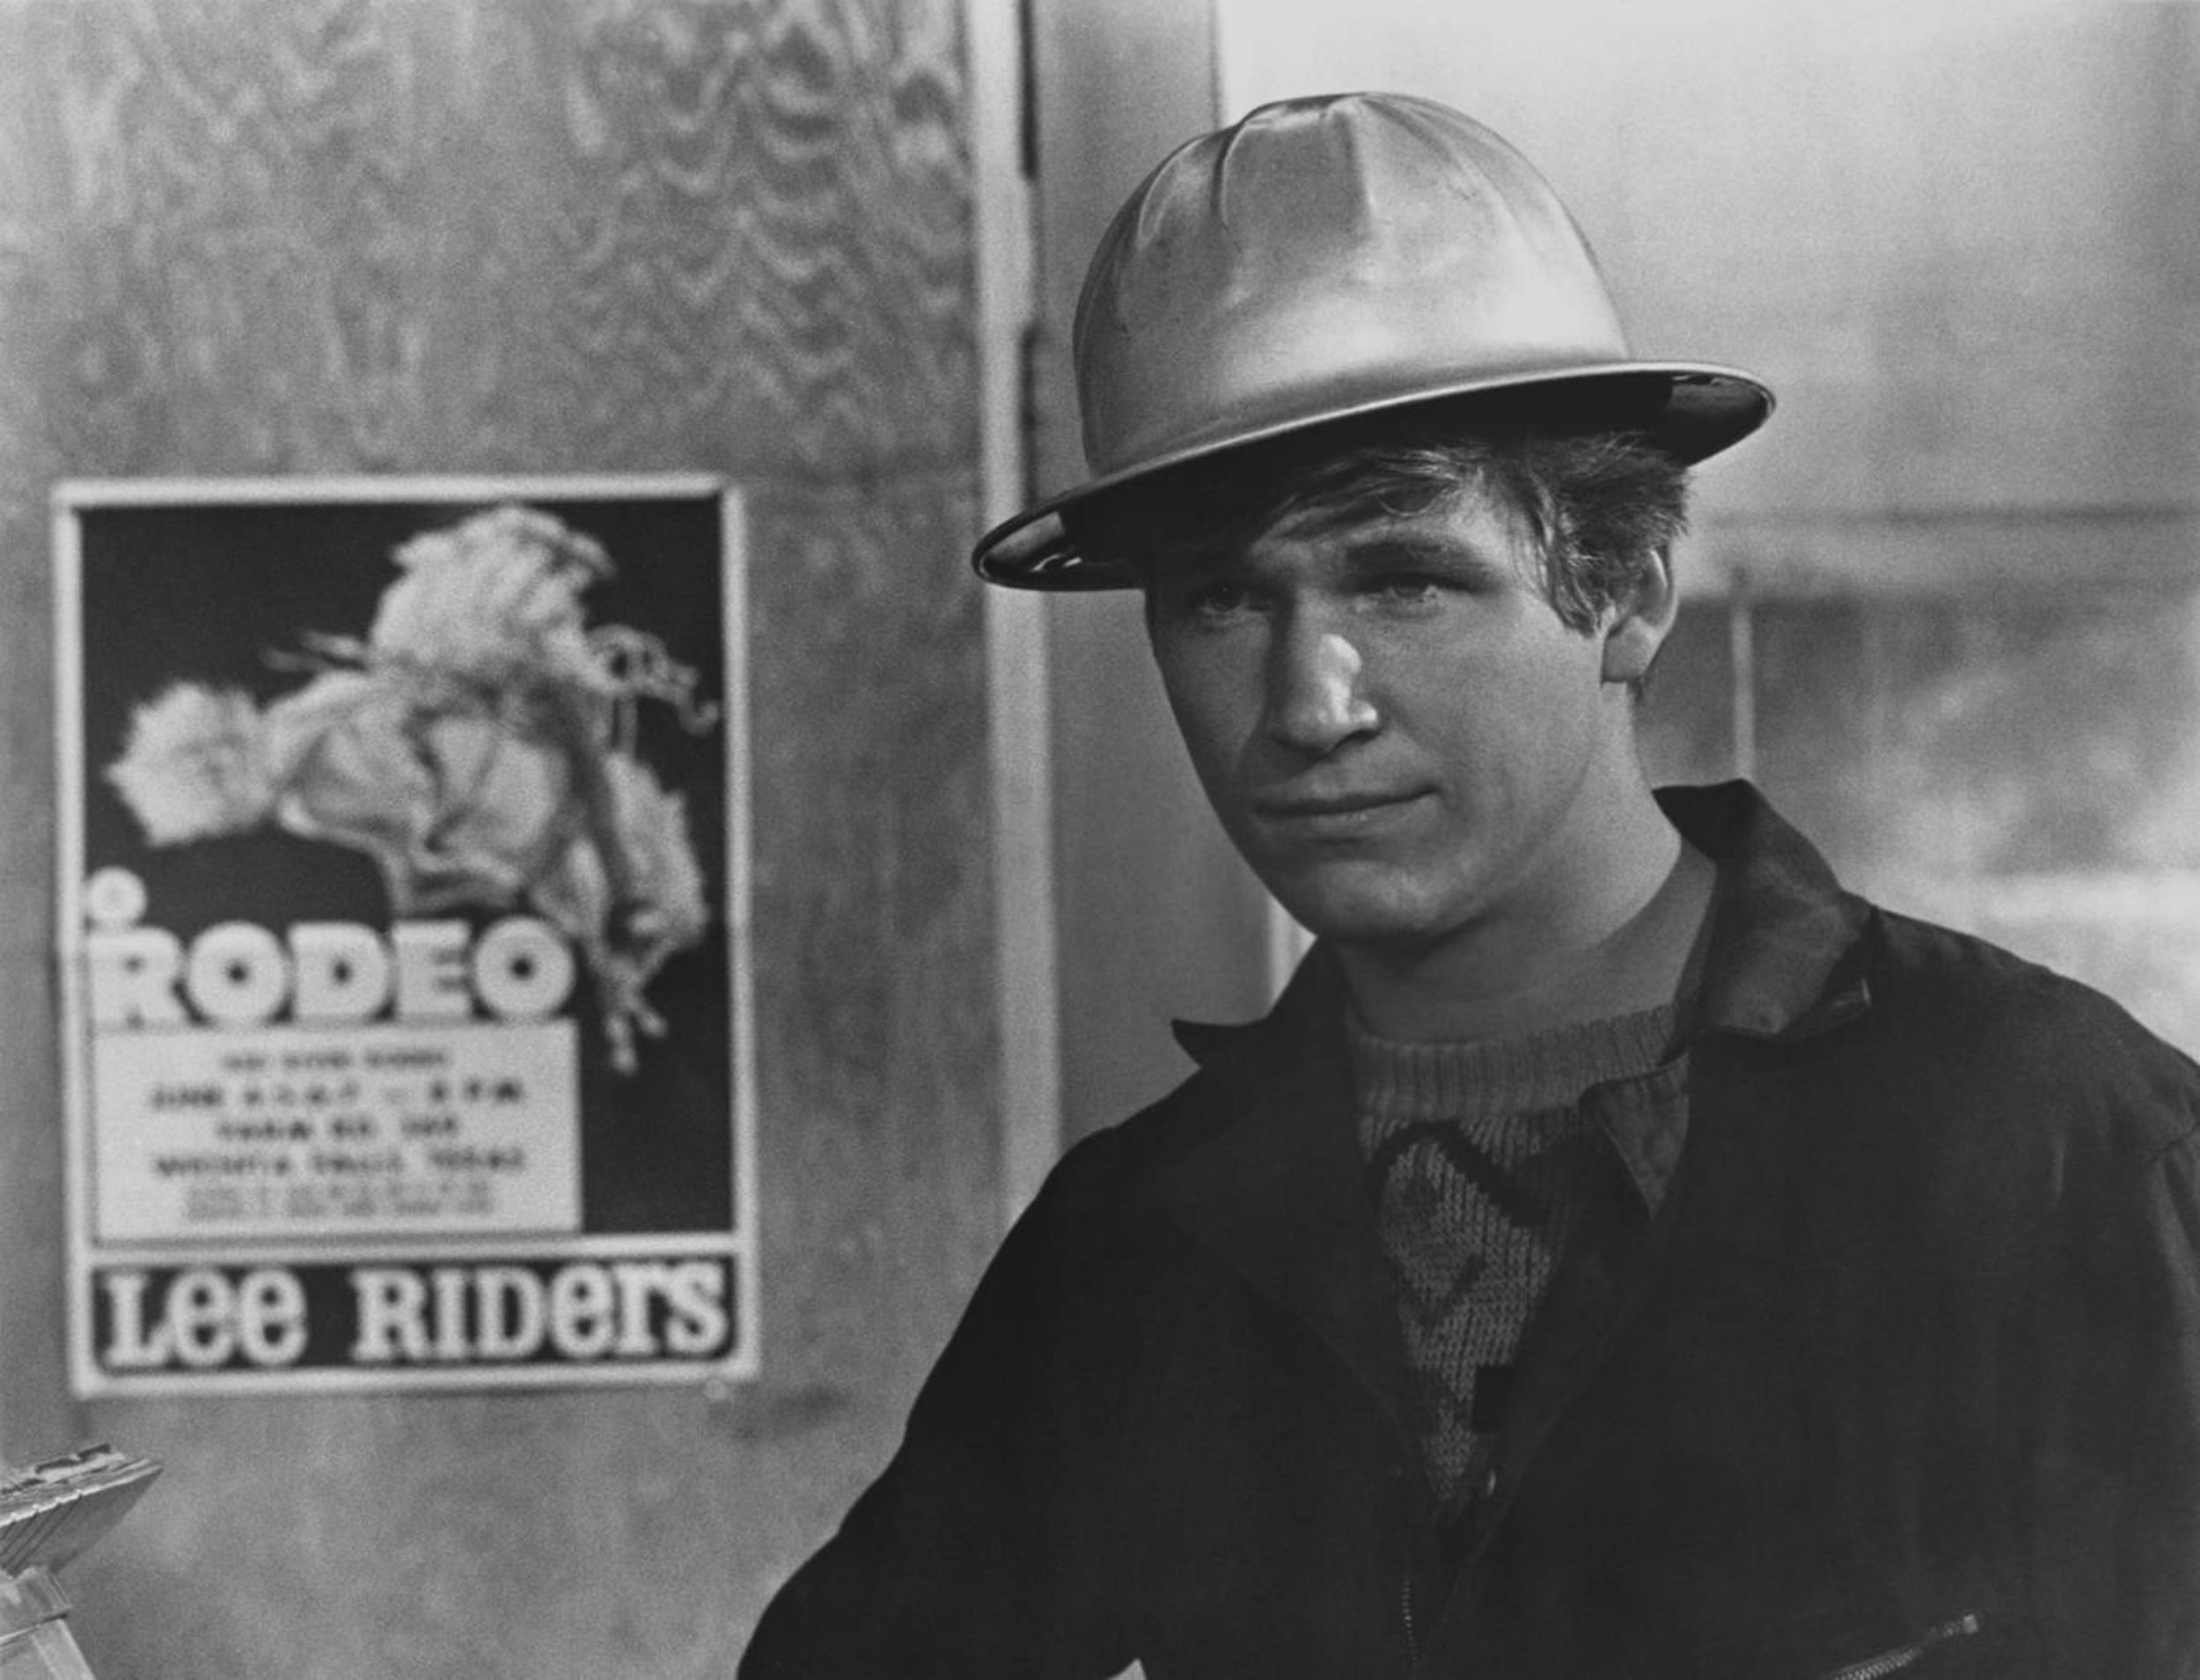 <p>Bridges has been “grizzled” for so long, it can be hard to remember him as a young, angular actor. In only his second film role, Bridges showed he was more than just Lloyd’s son. In fact, in this coming-of-age film that made Peter Bogdonovich’s career, Bridges was nominated for Best Supporting Actor.</p><p>You may also like: <a href='https://www.yardbarker.com/entertainment/articles/pop_culture_villains_who_turned_good_at_least_for_a_little_while/s1__35111087'>Pop culture villains who turned good (at least for a little while)</a></p>